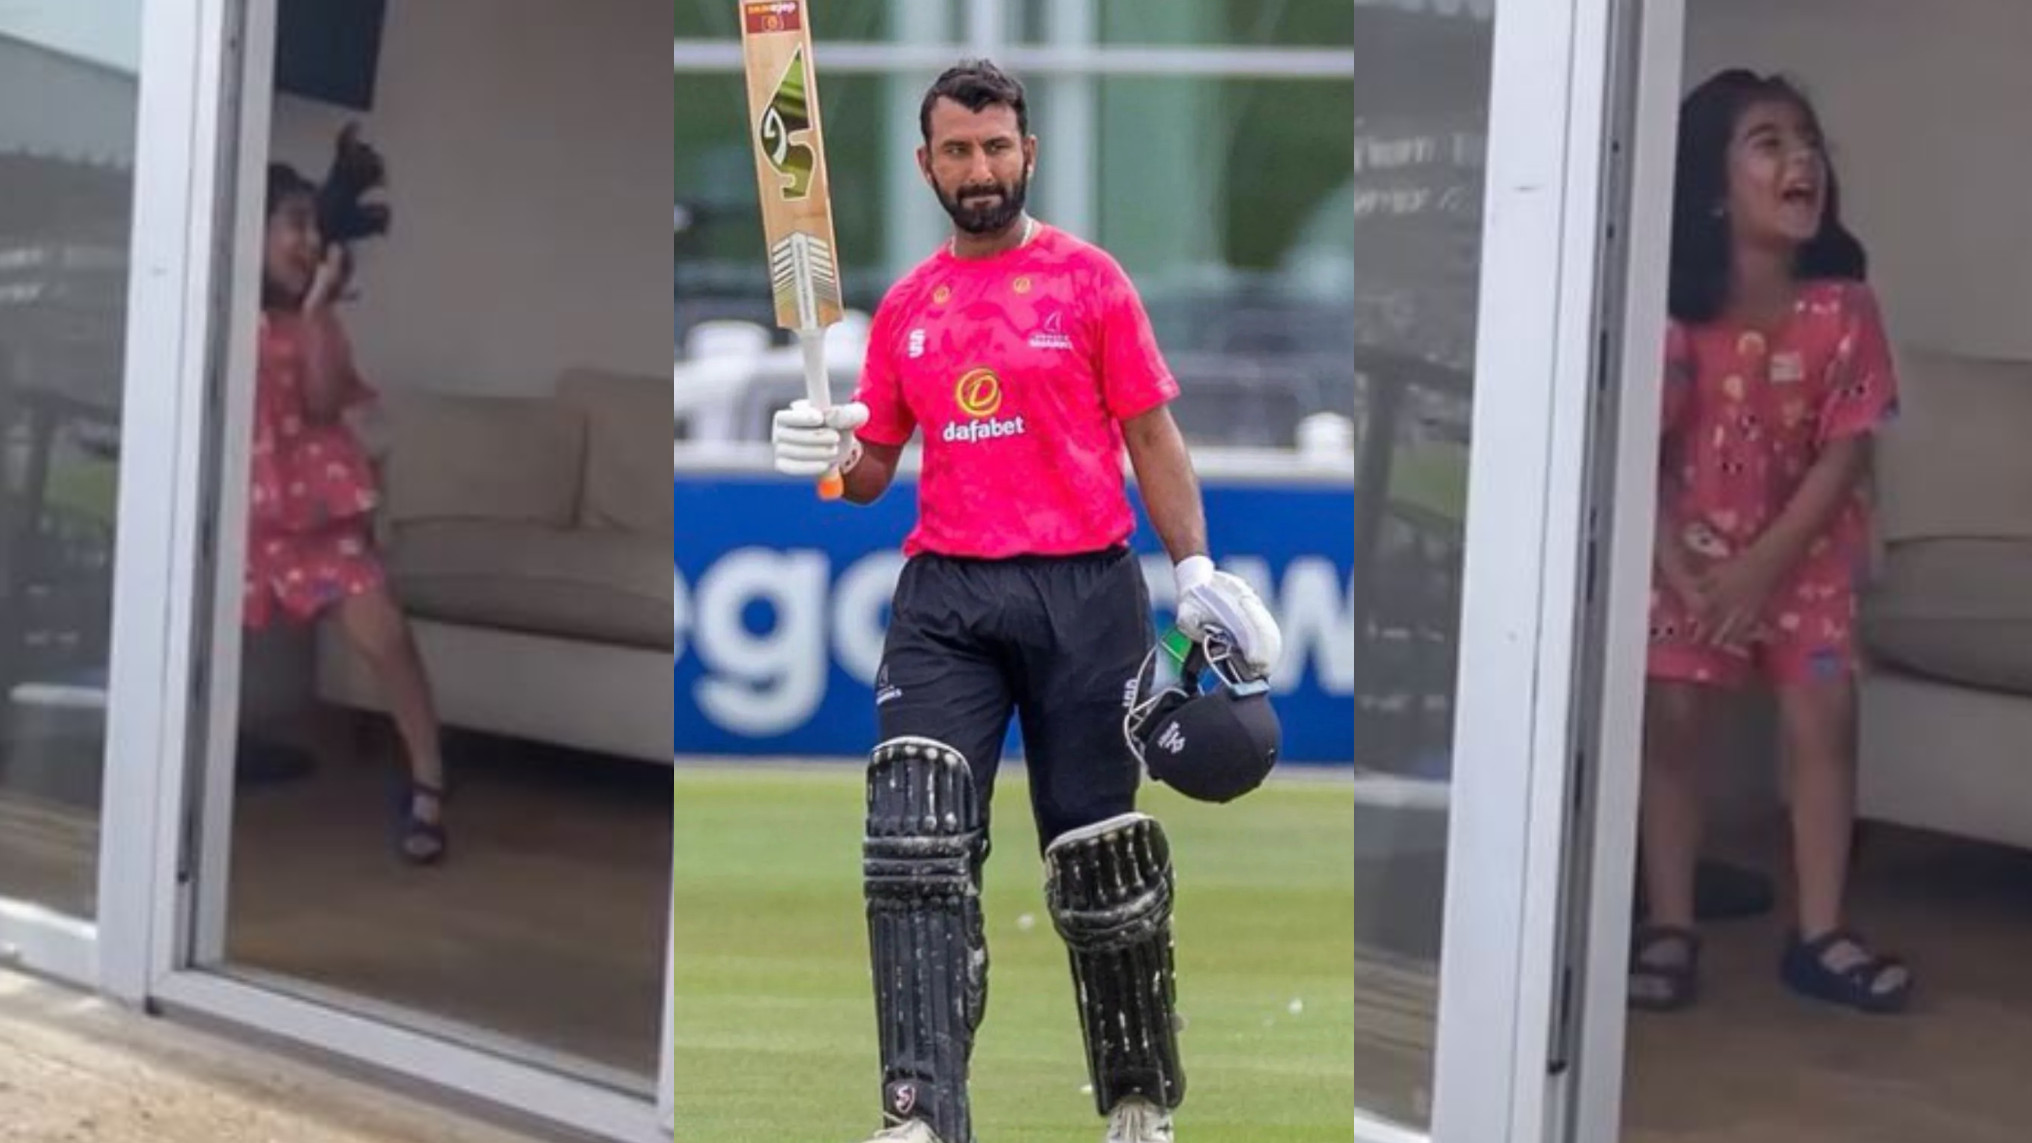 WATCH- Cheteshwar Pujara’s daughter Aditi claps and celebrates after his majestic 174 for Sussex